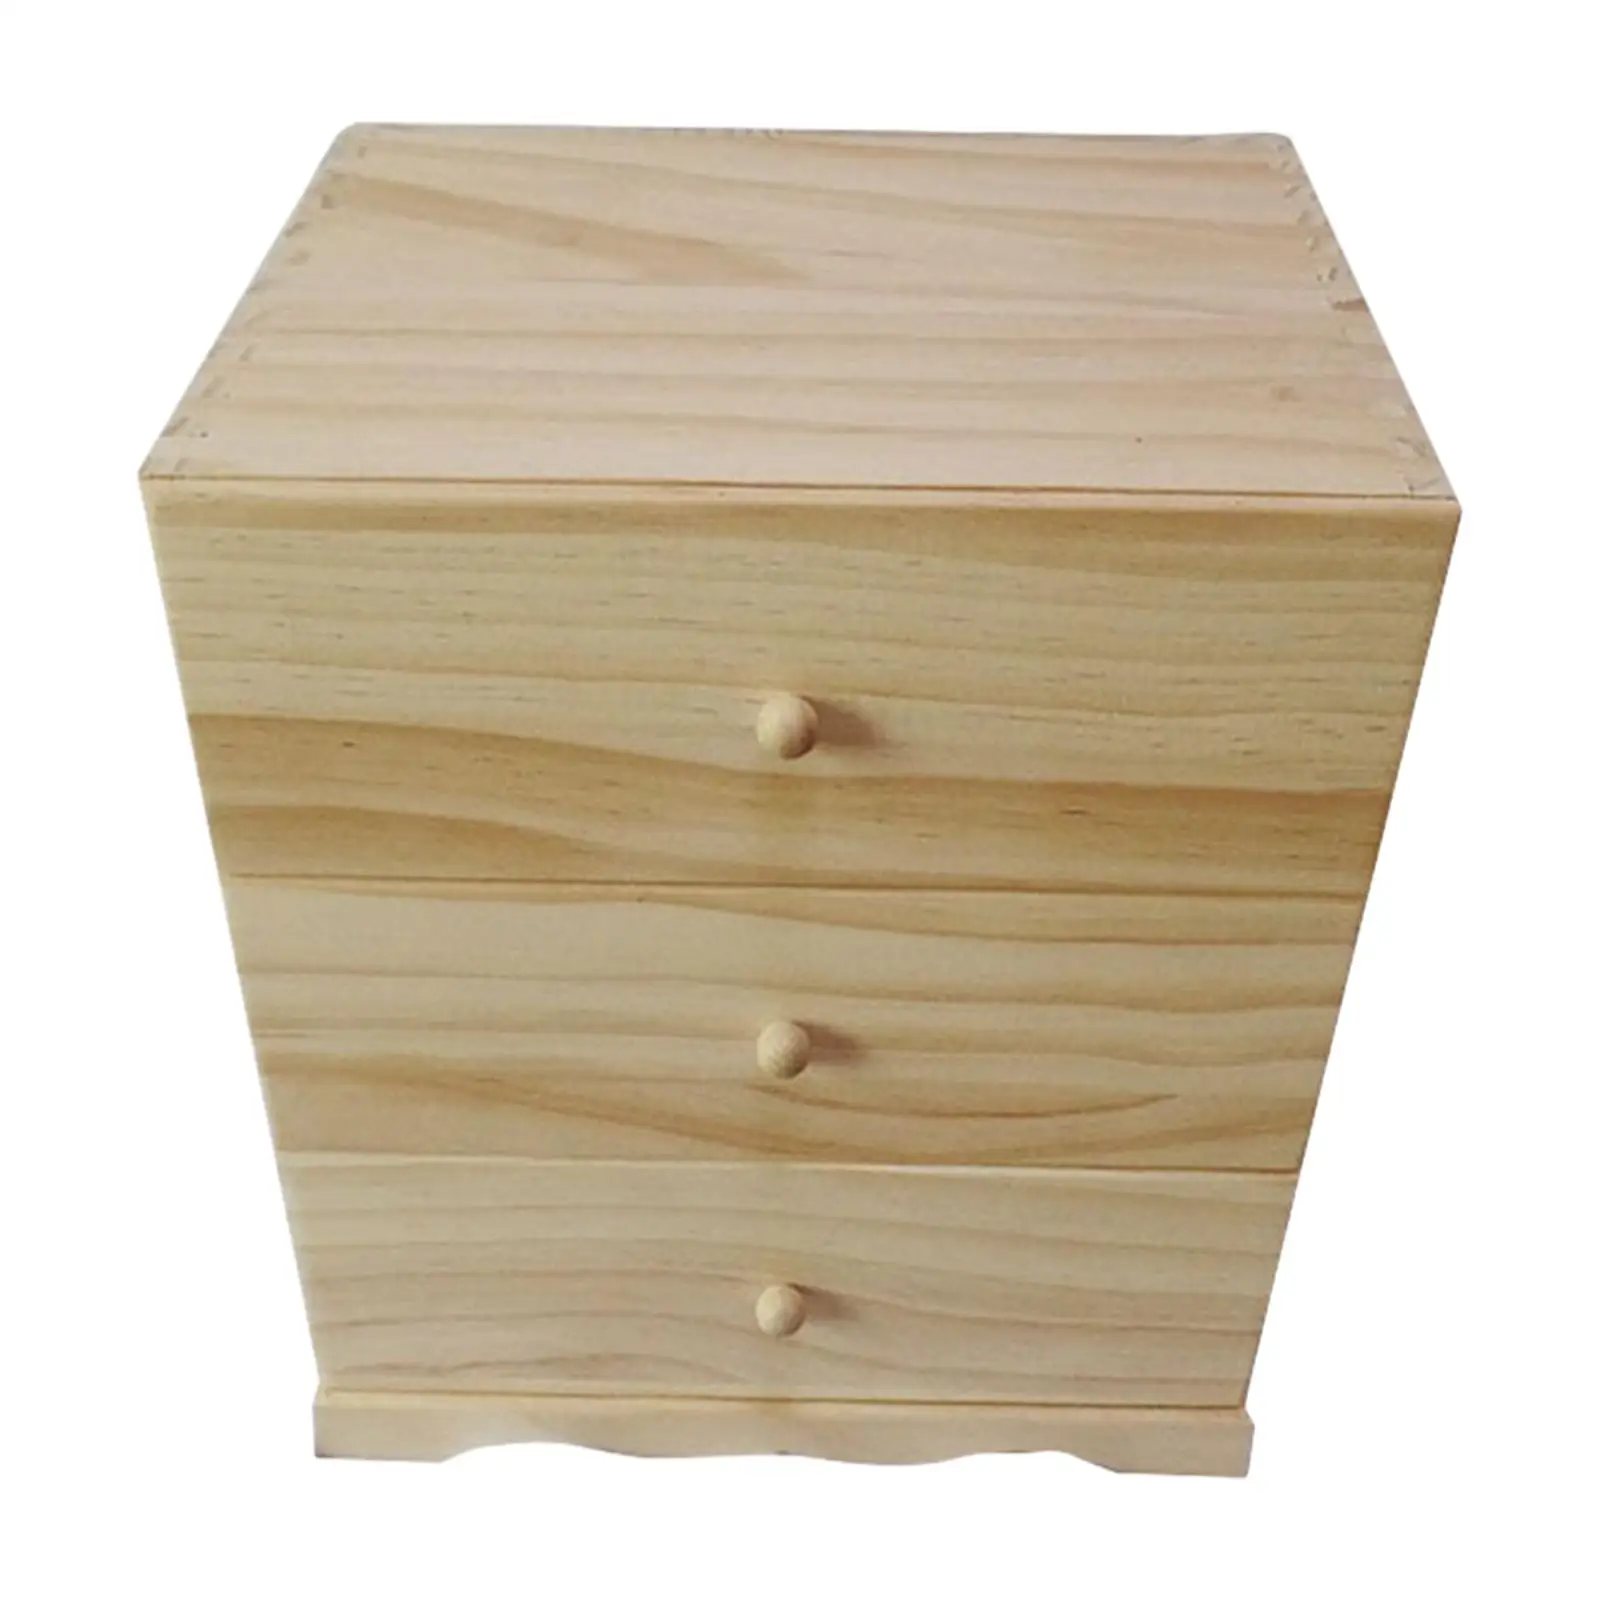 Essential Oil Holder Organizer Tier Height 7.5cm Space Saving Home Storage Portable Wooden Essential Oil Box Perfume Container